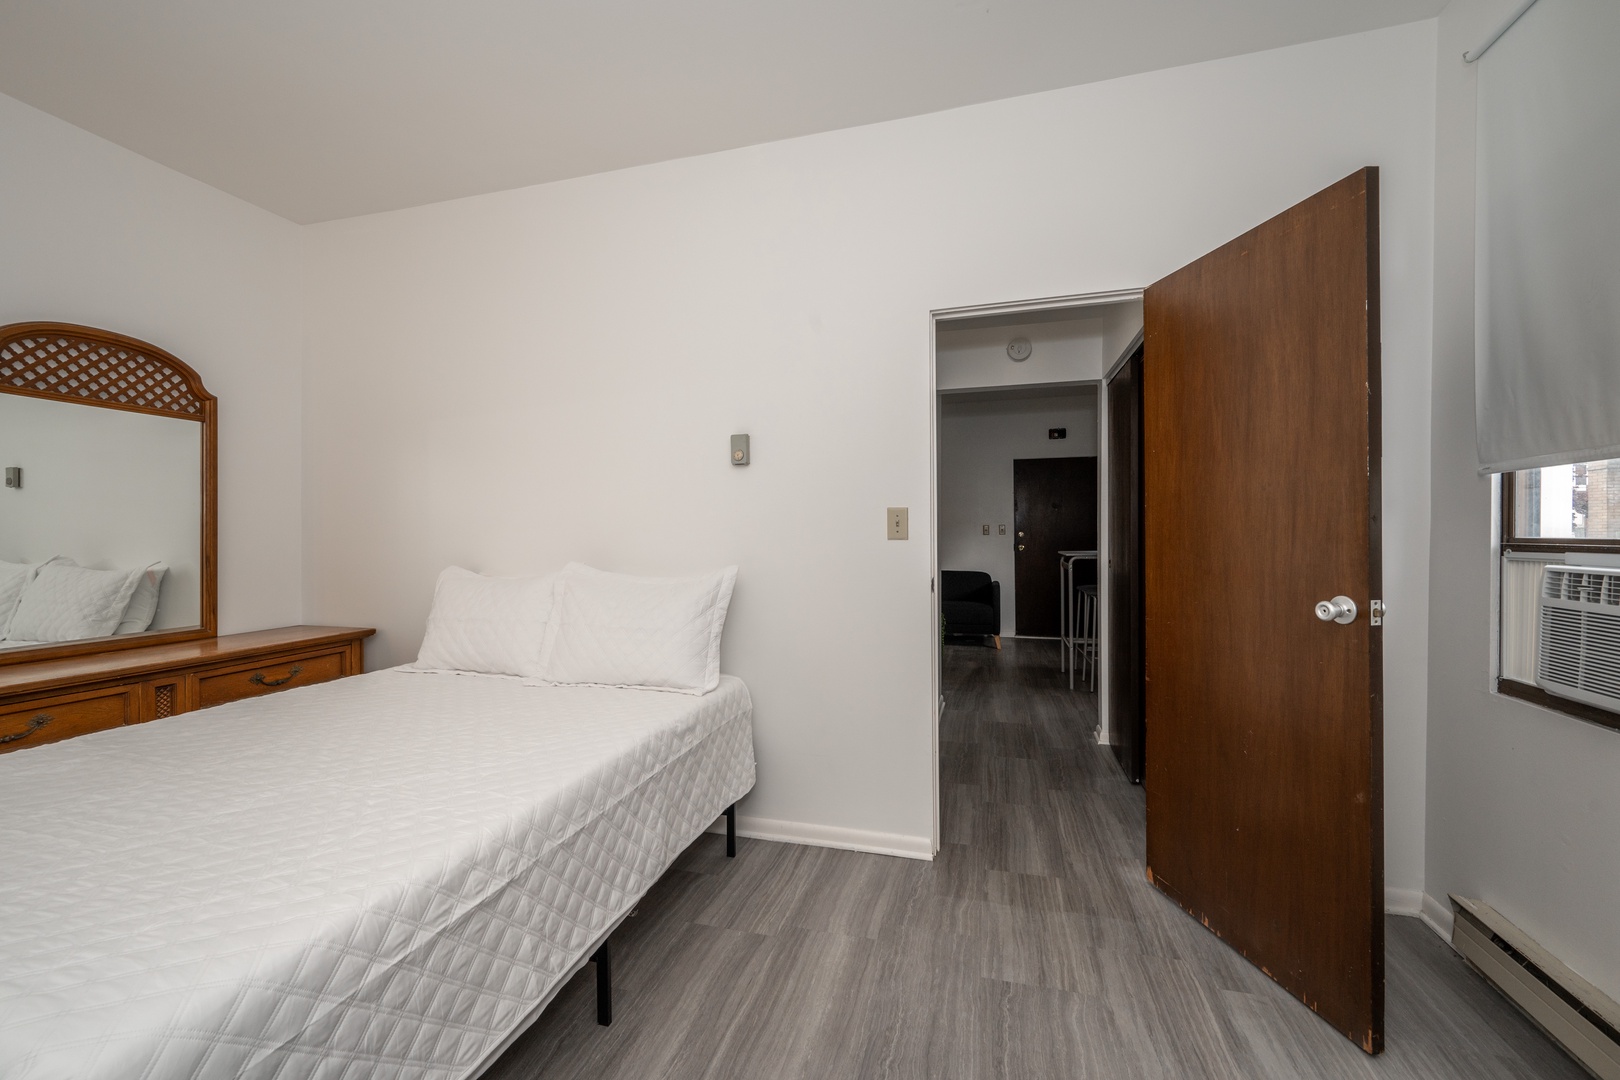 The bedroom retreat features a plush queen-sized bed & large dresser